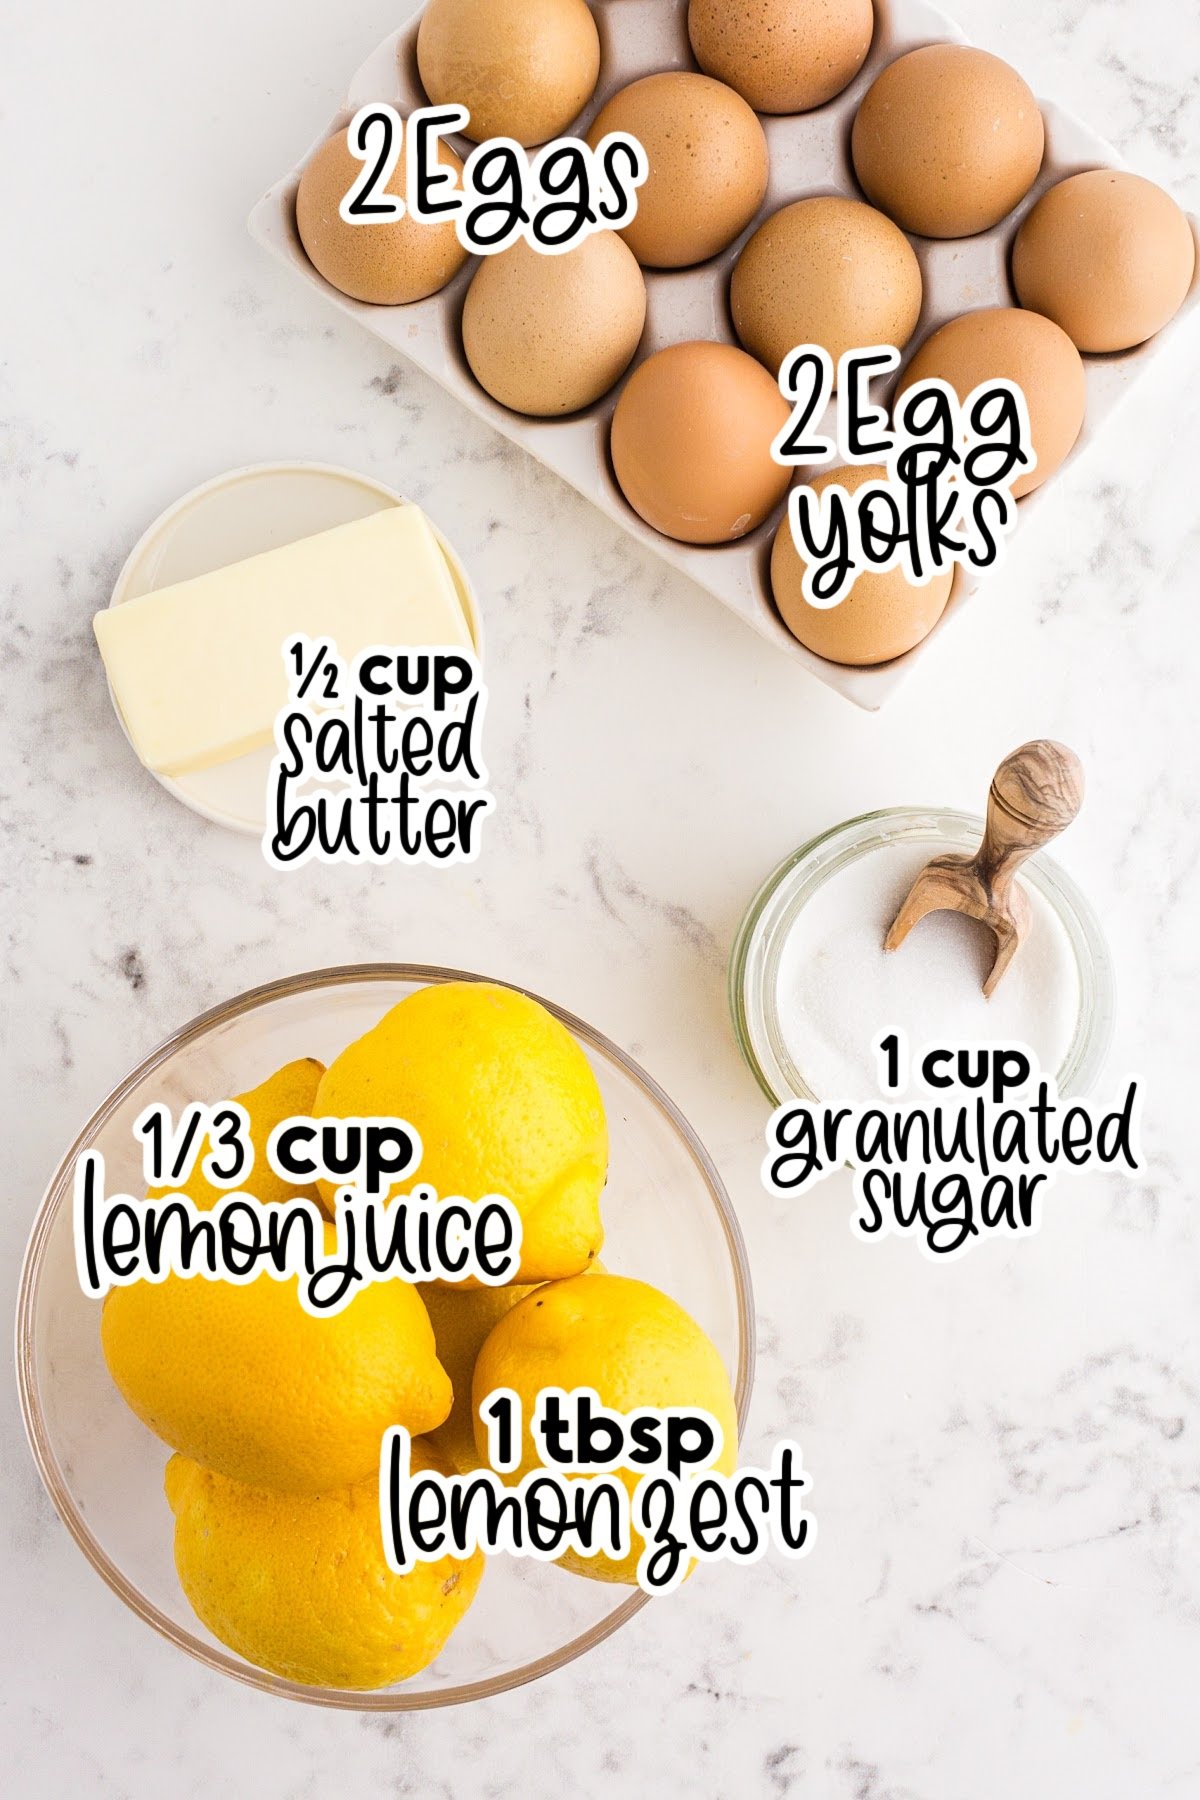 All ingredients layed out on the countertop to make this lemon curd, with text overlay.